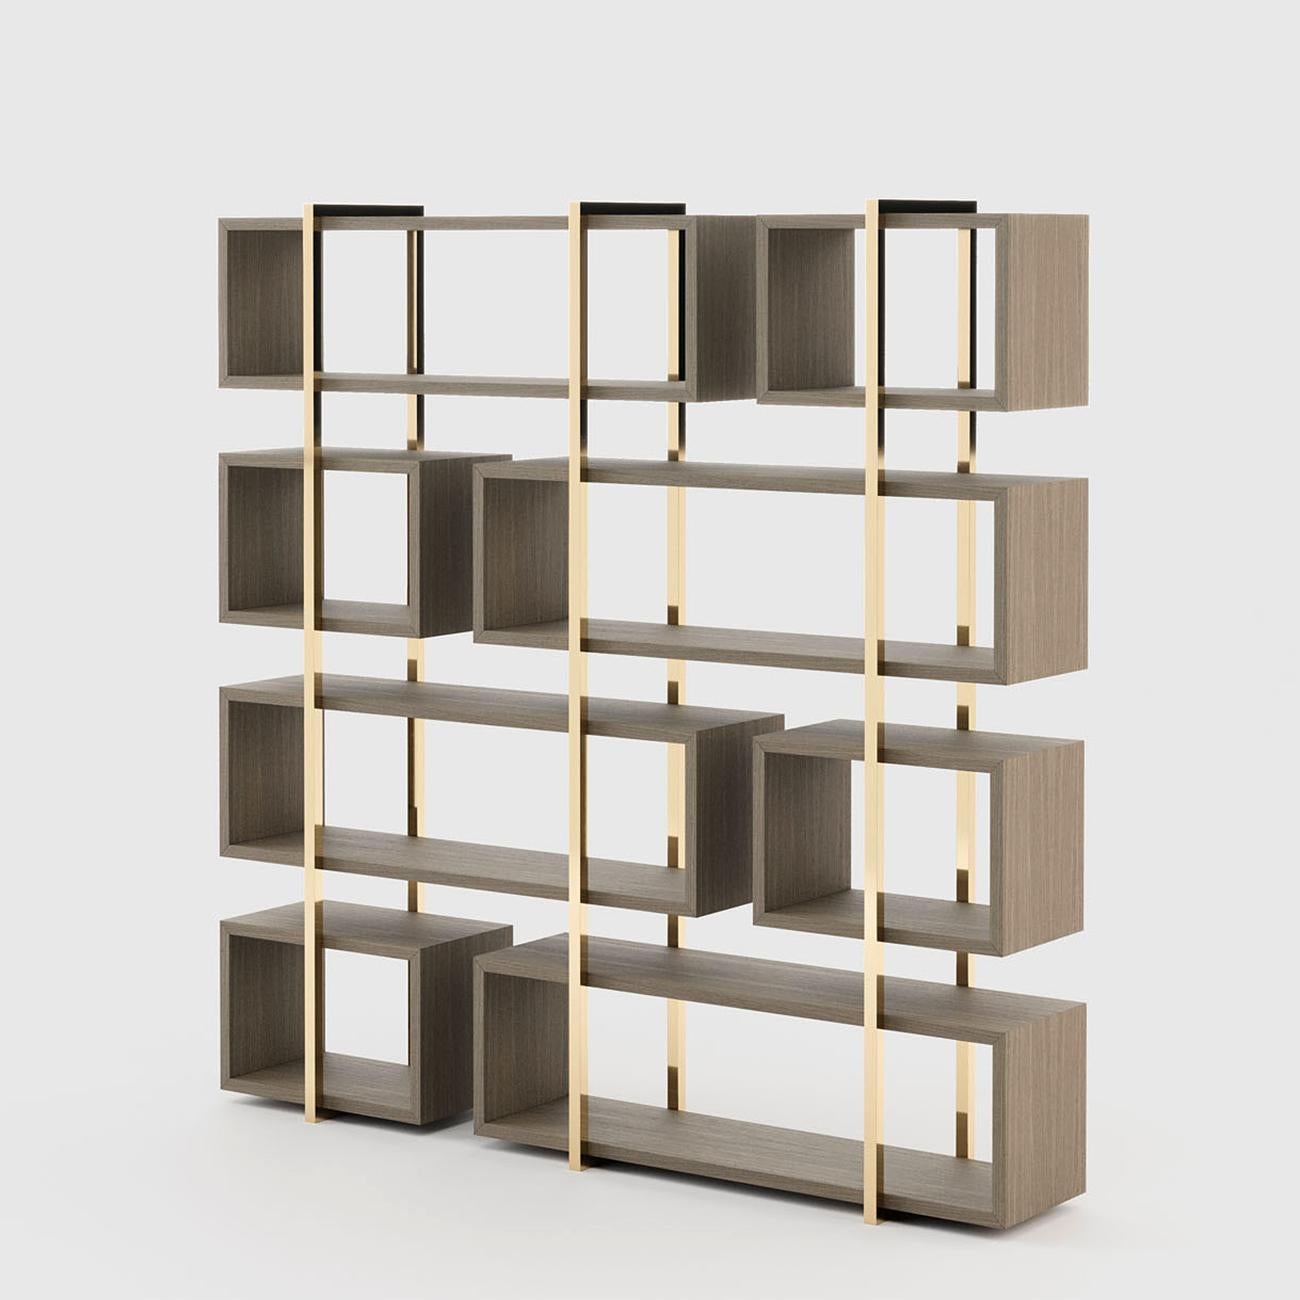 Bookcase Escarpe with vertical frame structure in polished
stainless steel in gold finish. With oak bookcases in old-aged
oak in matte finish. Also available with other stainless finishes and 
other wood finishes on request.